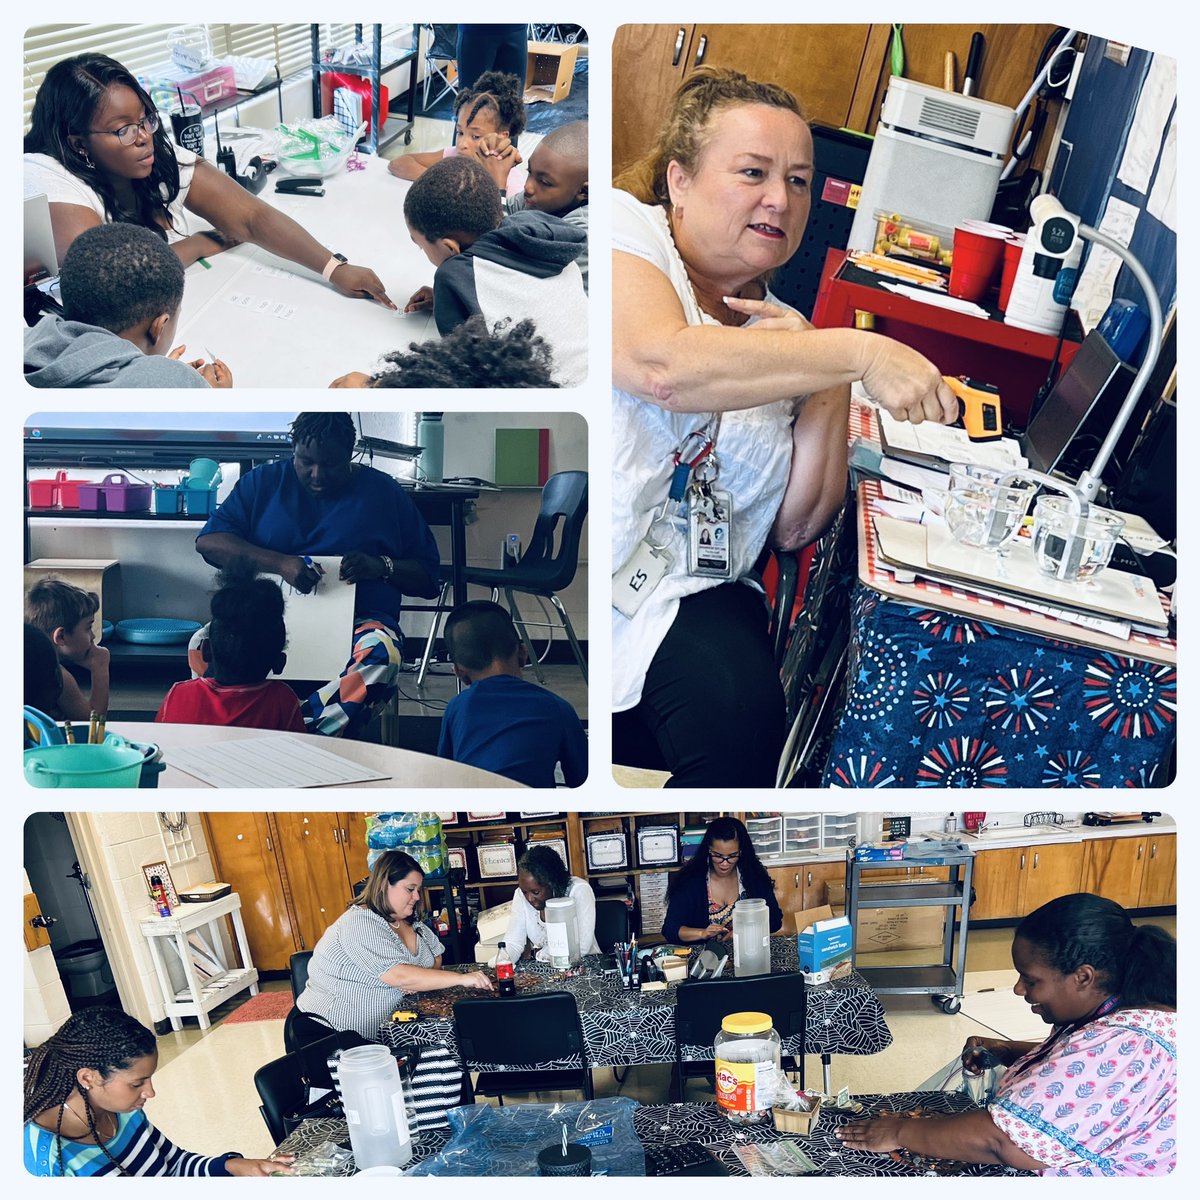 We had such a great day today!! Amazing walk-throughs with strong instruction in every class! We ended with all hands on deck counting our change for @LightTheNight. @taimonge @mrsgray620 @Phyllis0426 @KMcCray25 @sheilaelon